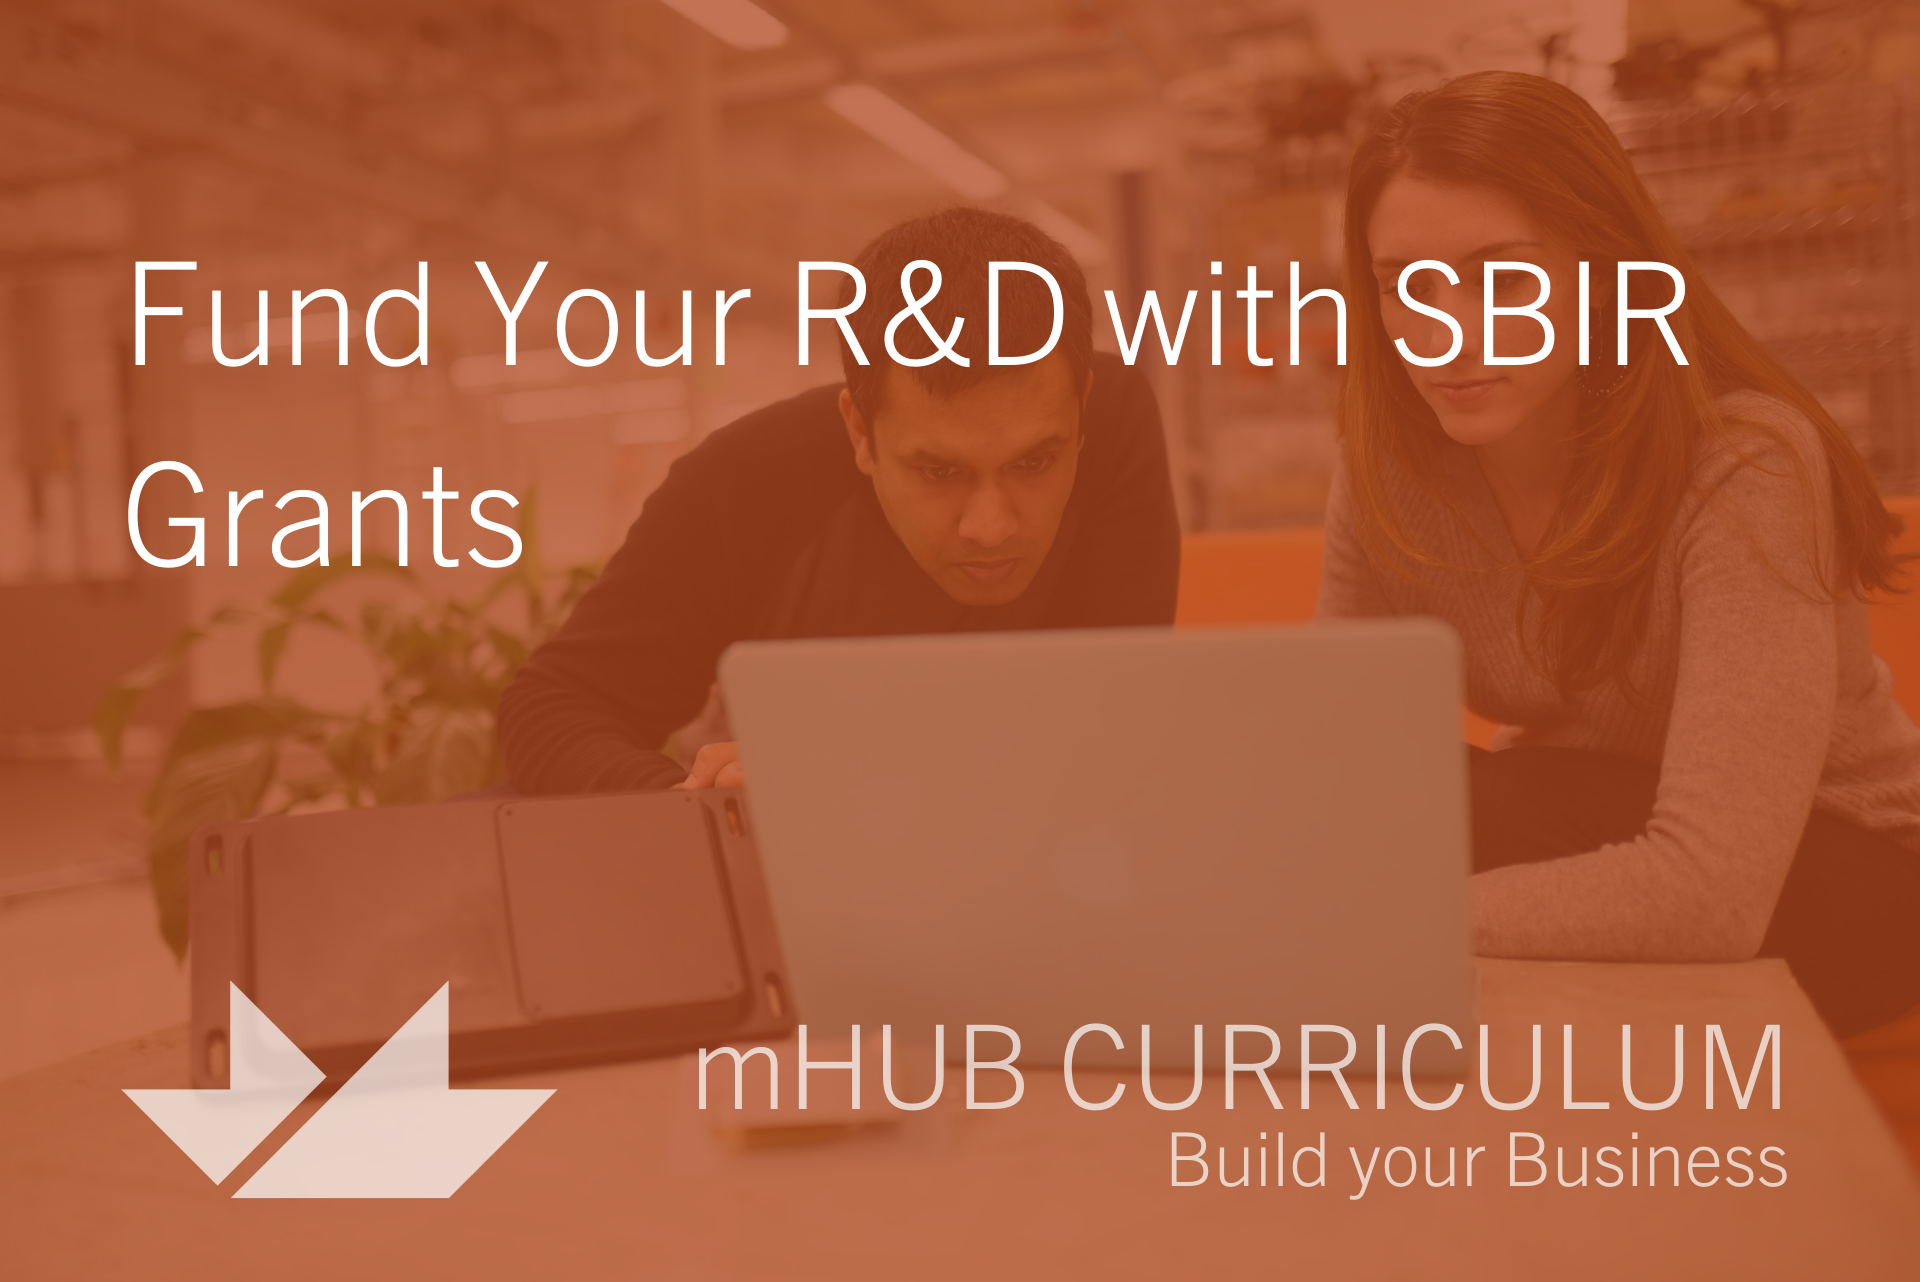 Corporate Finance Structure: Fund Your R&D with SBIR Grants